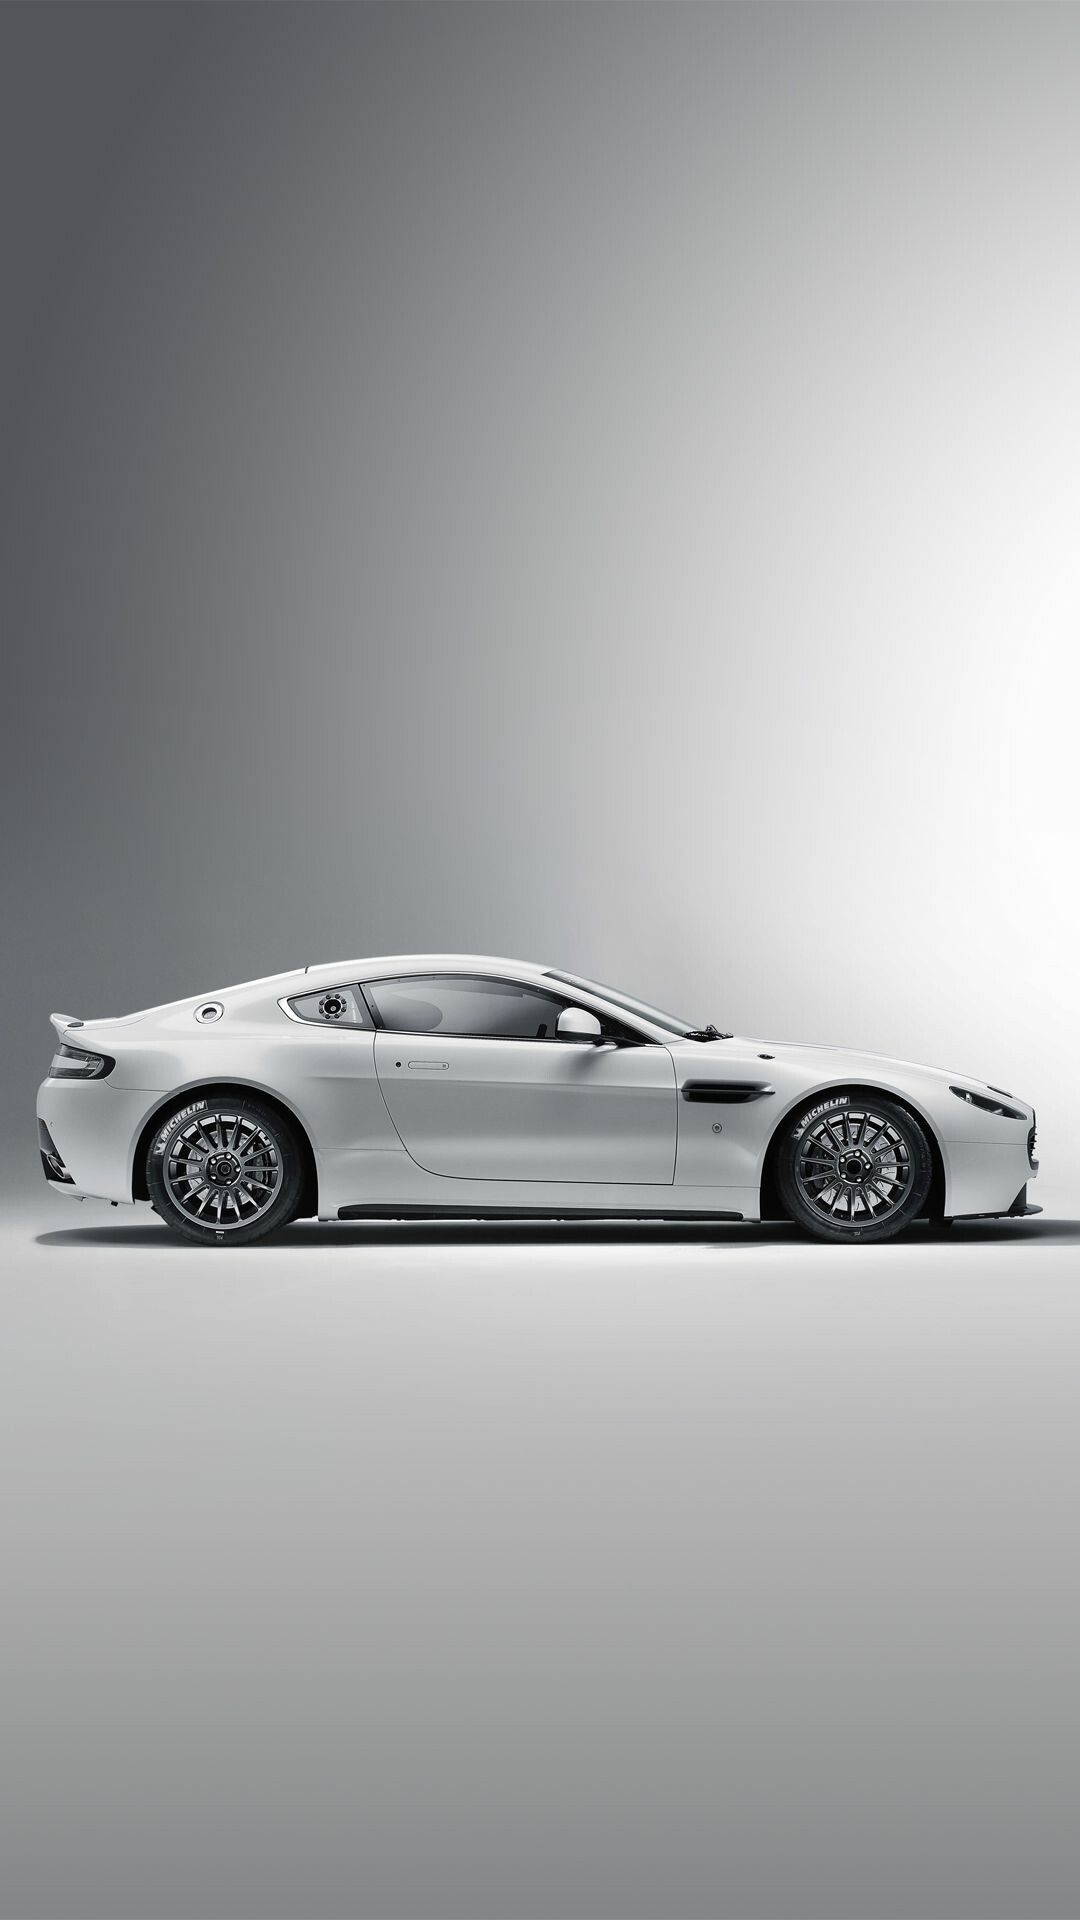 Aston Martin: A British company known worldwide for its creation and production of luxury sports cars, AM Vantage. 1080x1920 Full HD Background.